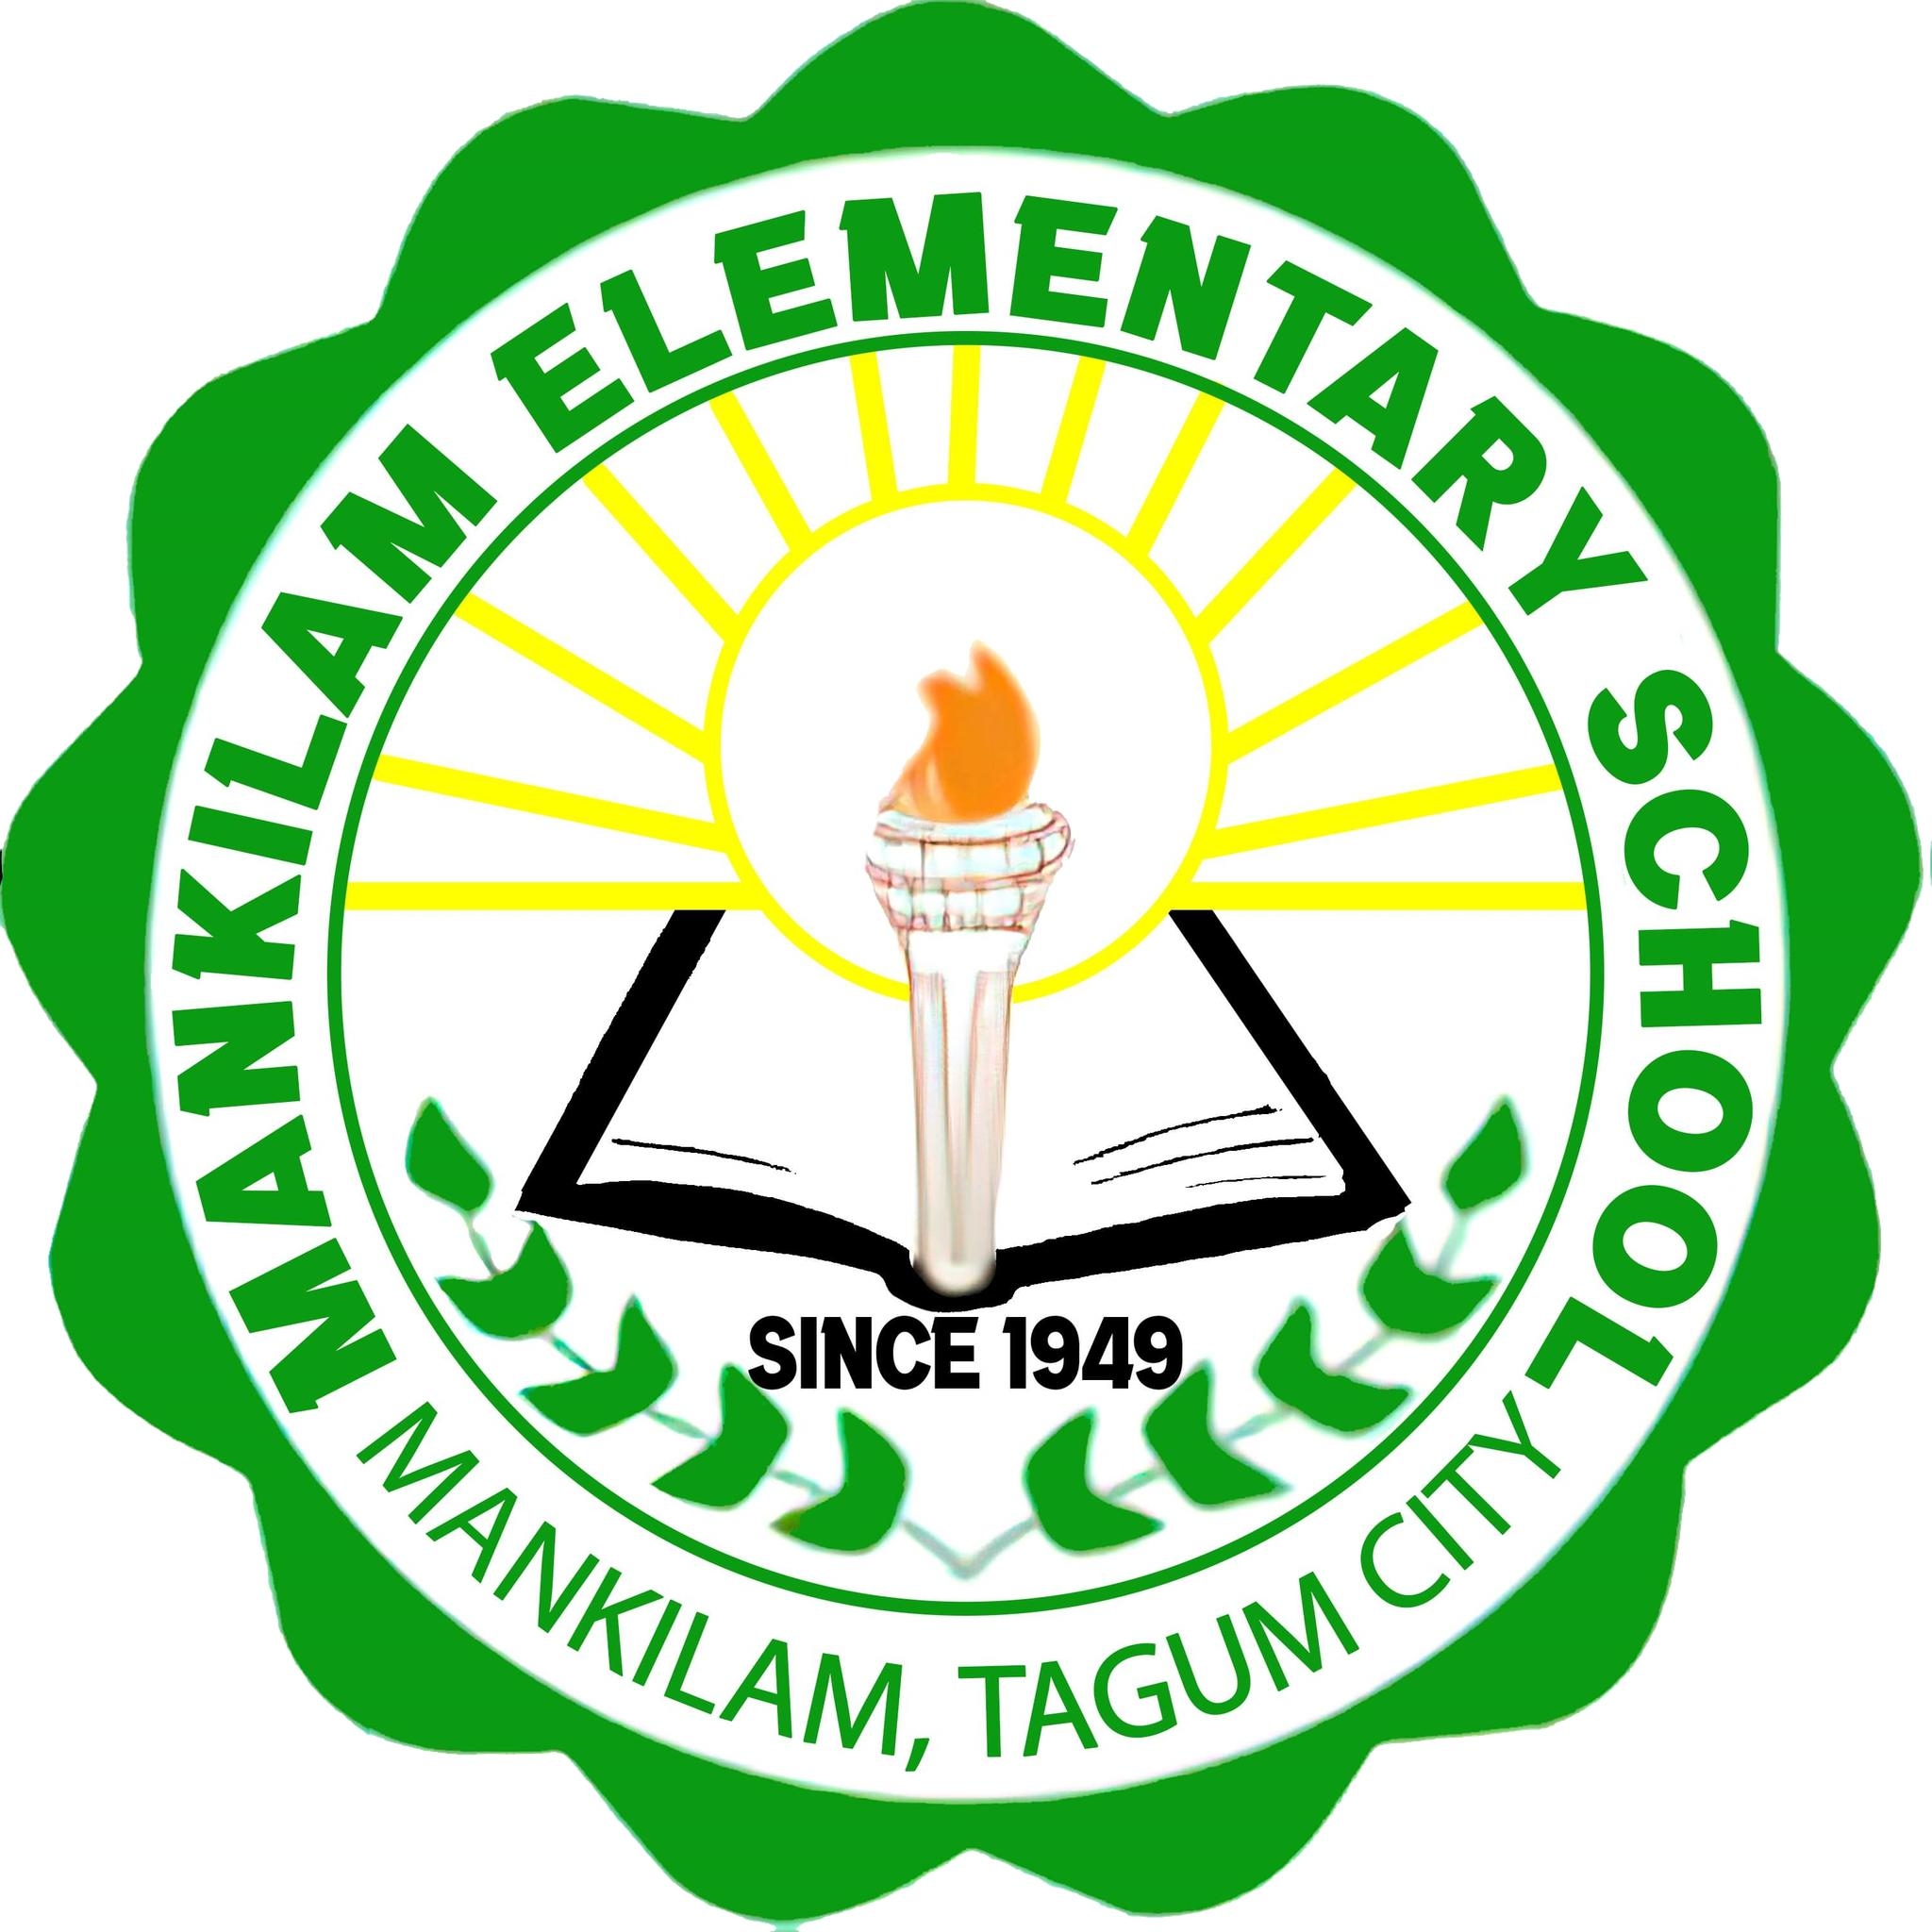 You are currently viewing Mankilam Elementary School – Tagum City